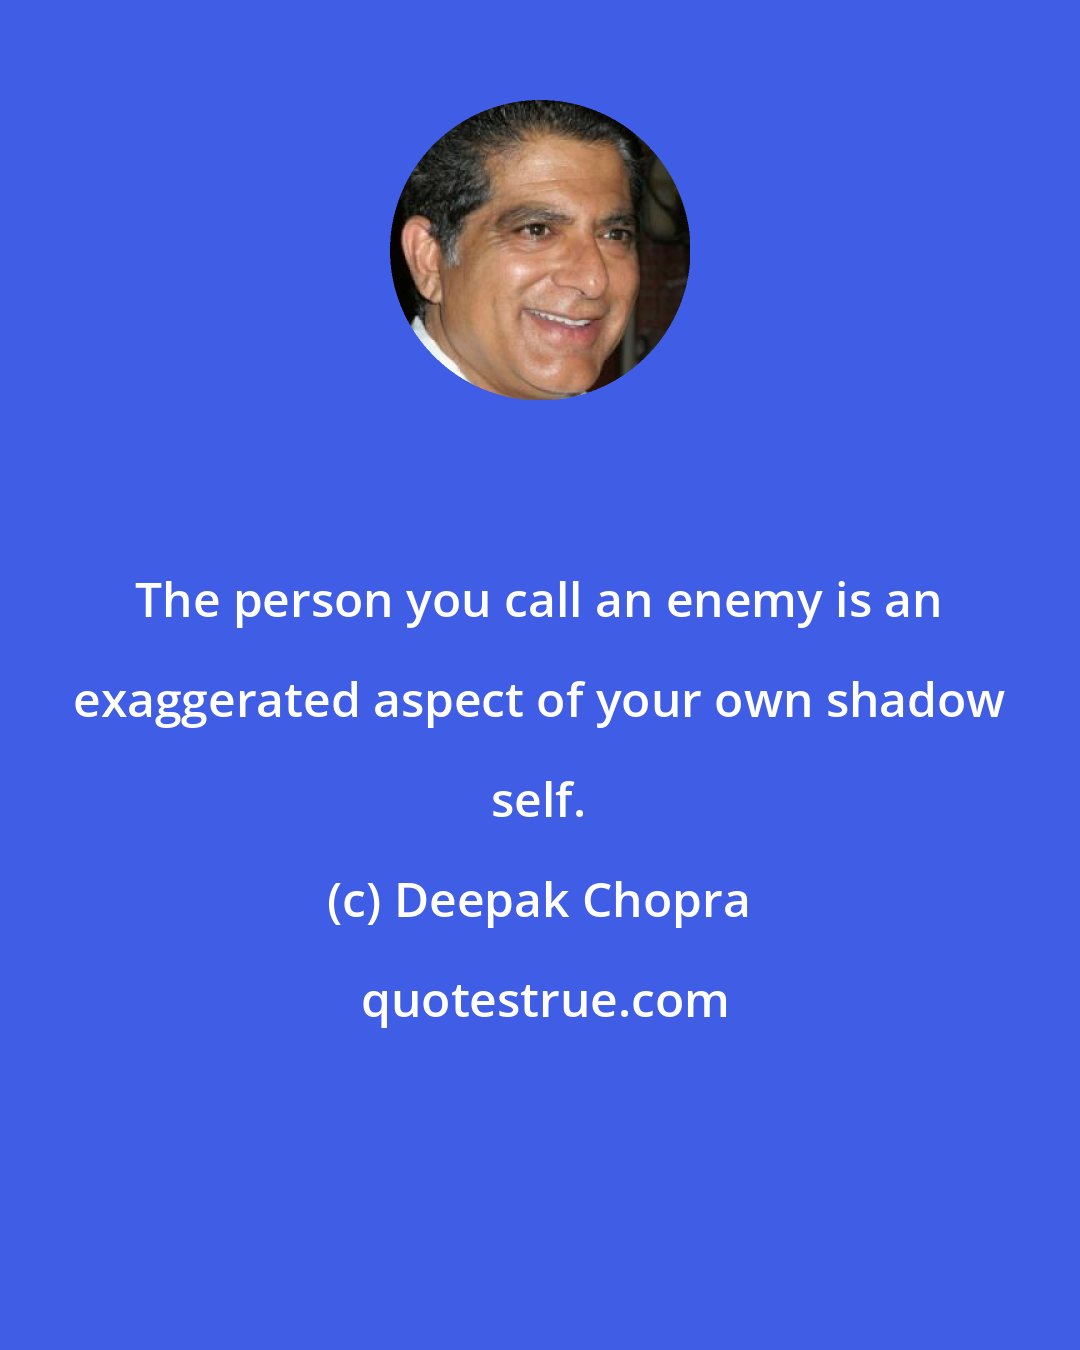 Deepak Chopra: The person you call an enemy is an exaggerated aspect of your own shadow self.